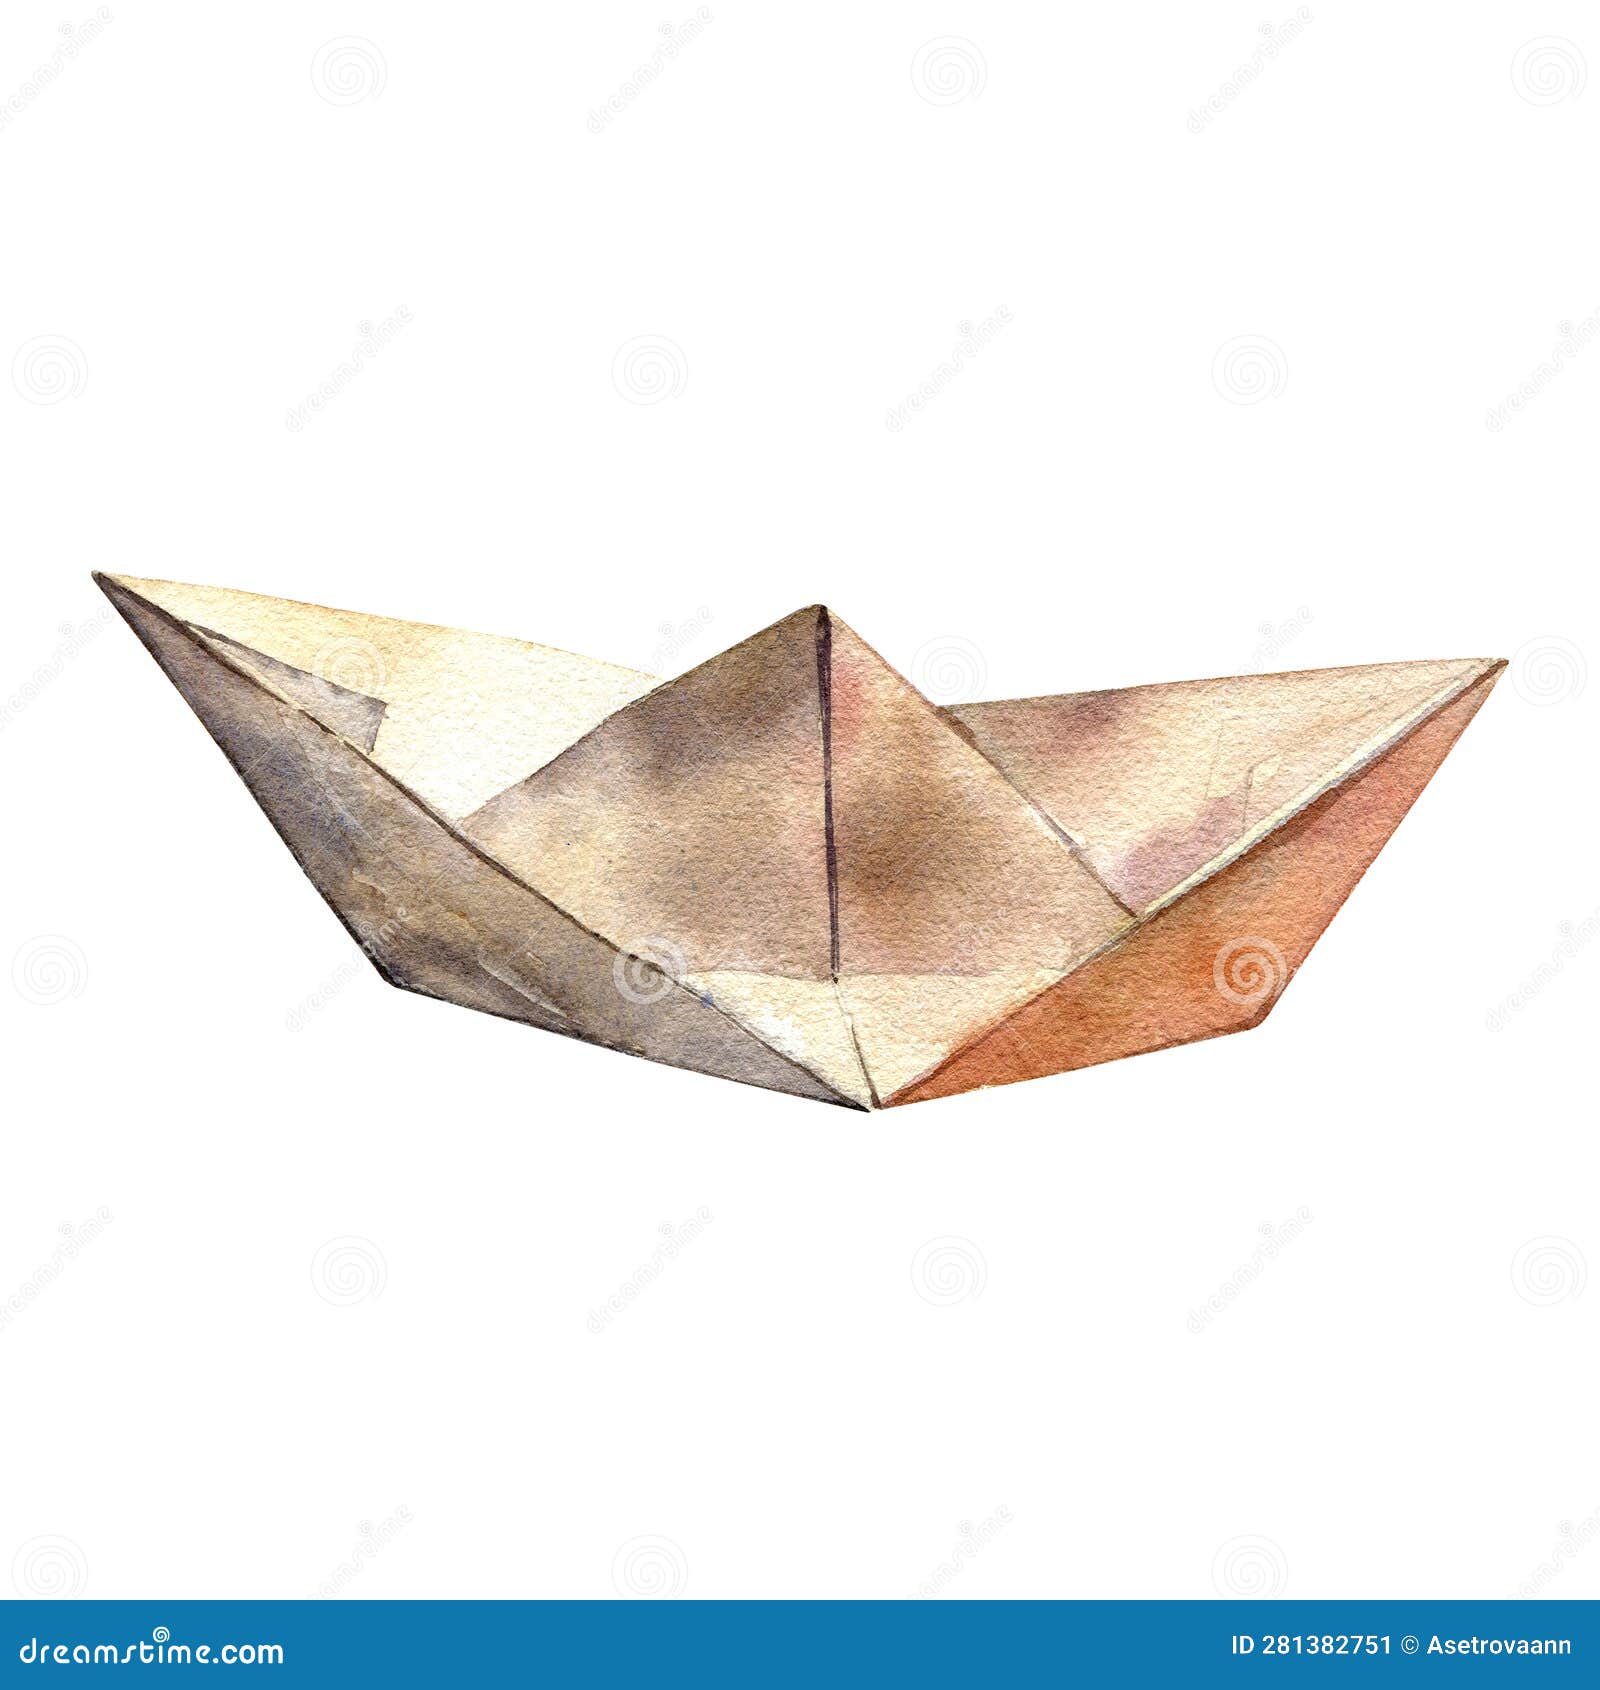 https://thumbs.dreamstime.com/z/realistic-paper-origami-boat-isolated-white-background-watercolor-hand-drawing-detailed-illustration-art-design-texture-281382751.jpg